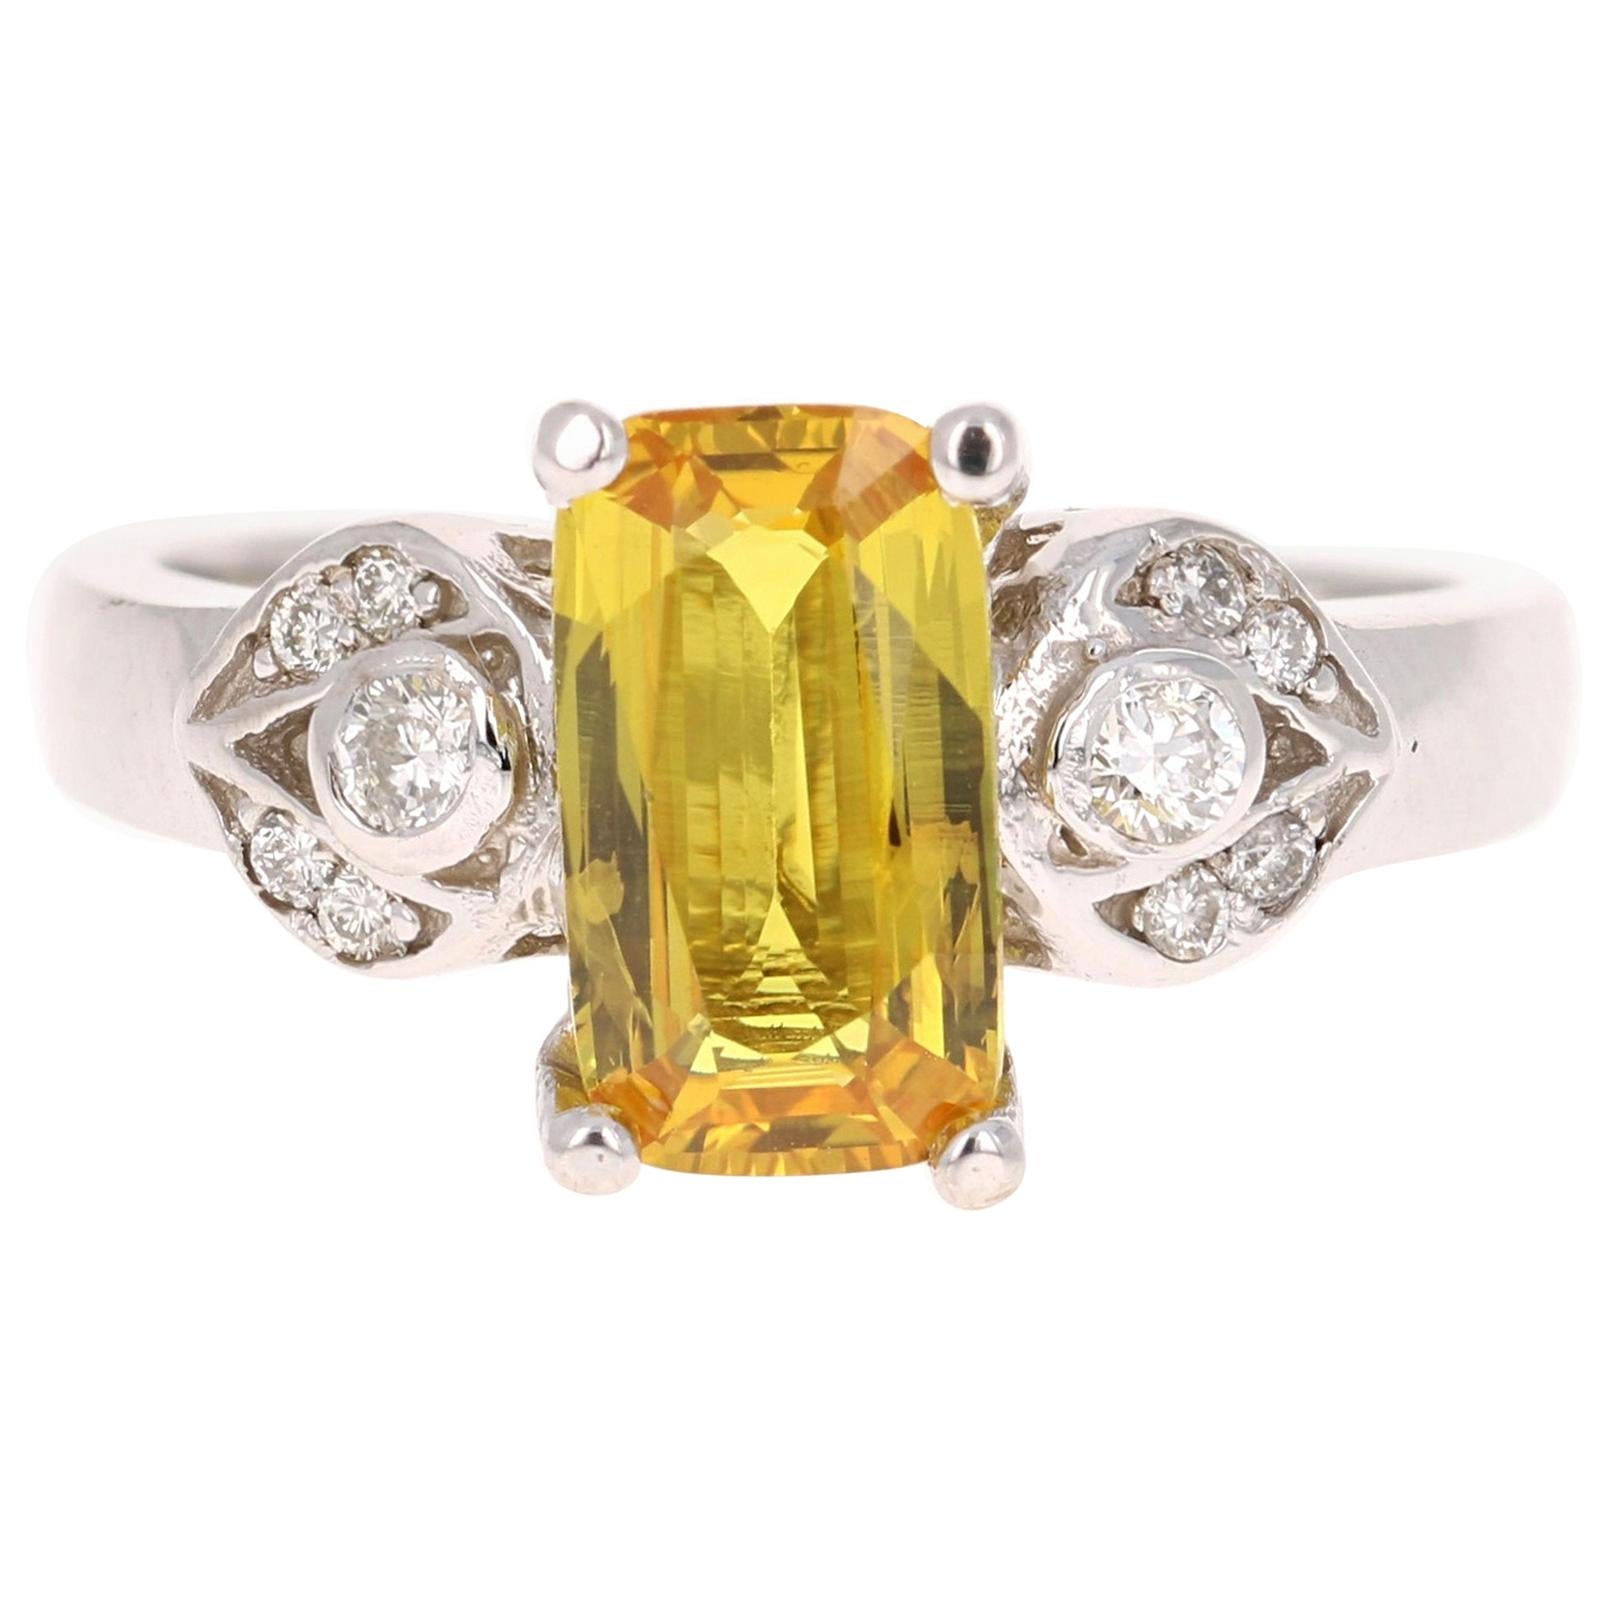 2.11 Carat Yellow Sapphire Diamond White Gold Ring For Sale